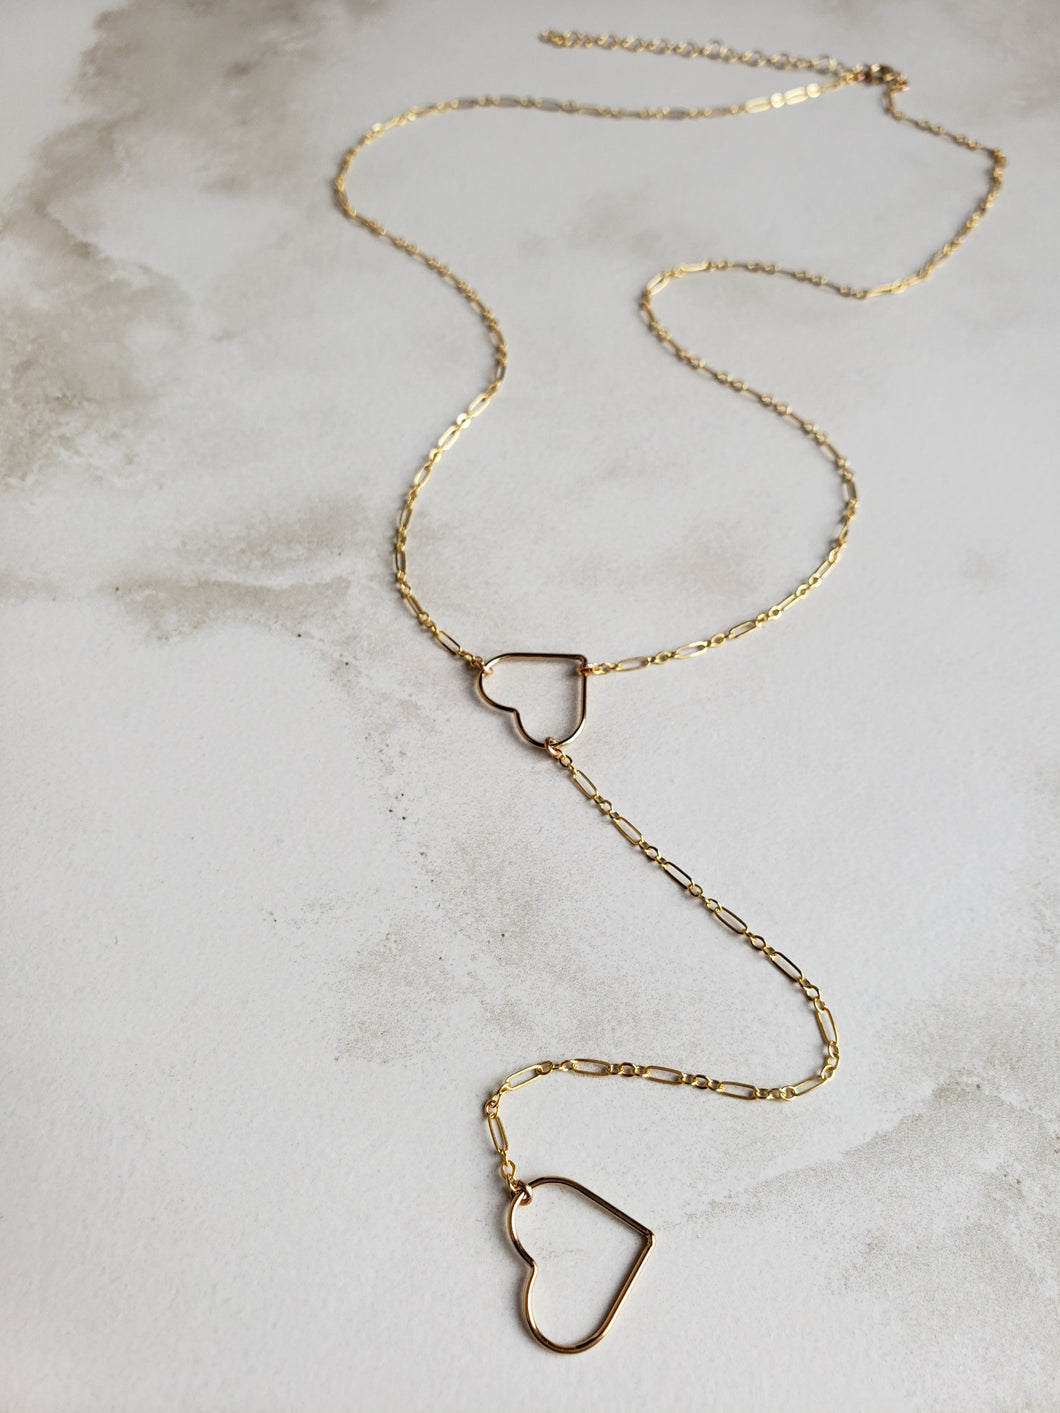 Large Open Heart Lariat Necklace